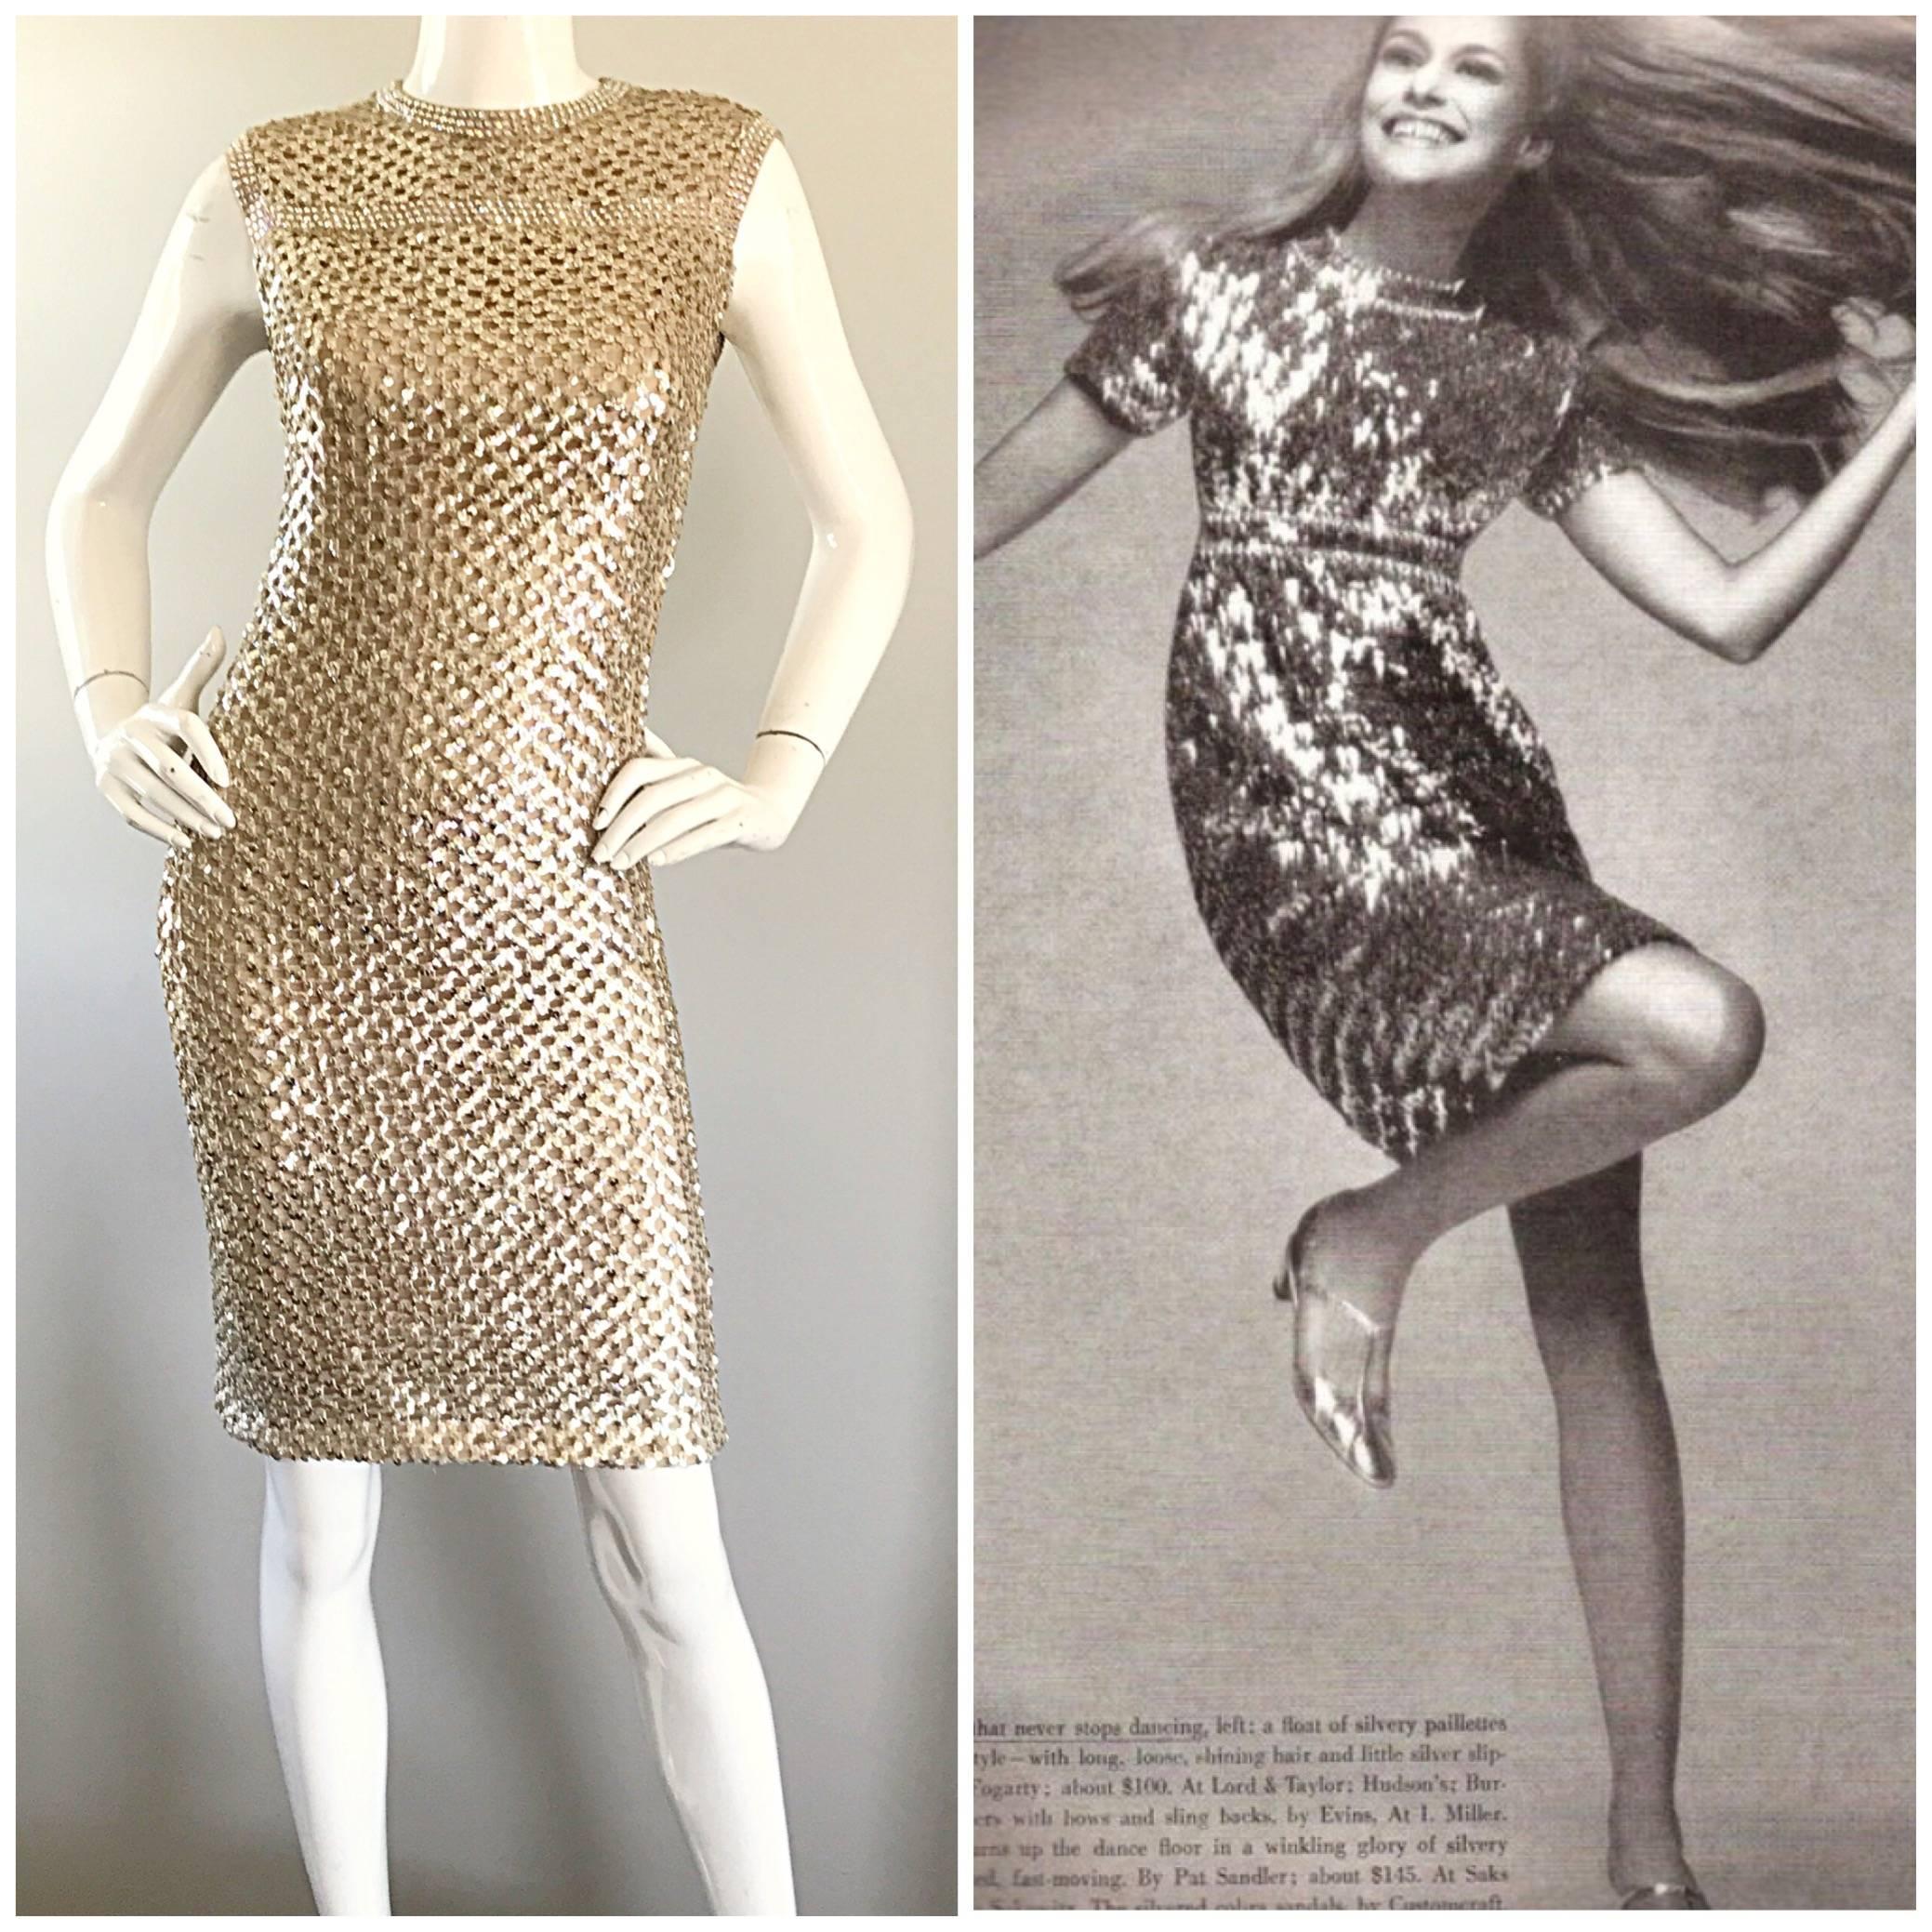 Beautiful documented PAT SANDLER 60s dress! The short sleeve version of this dress was photographed on LAUREN HUTTON in the mid 1960s for 